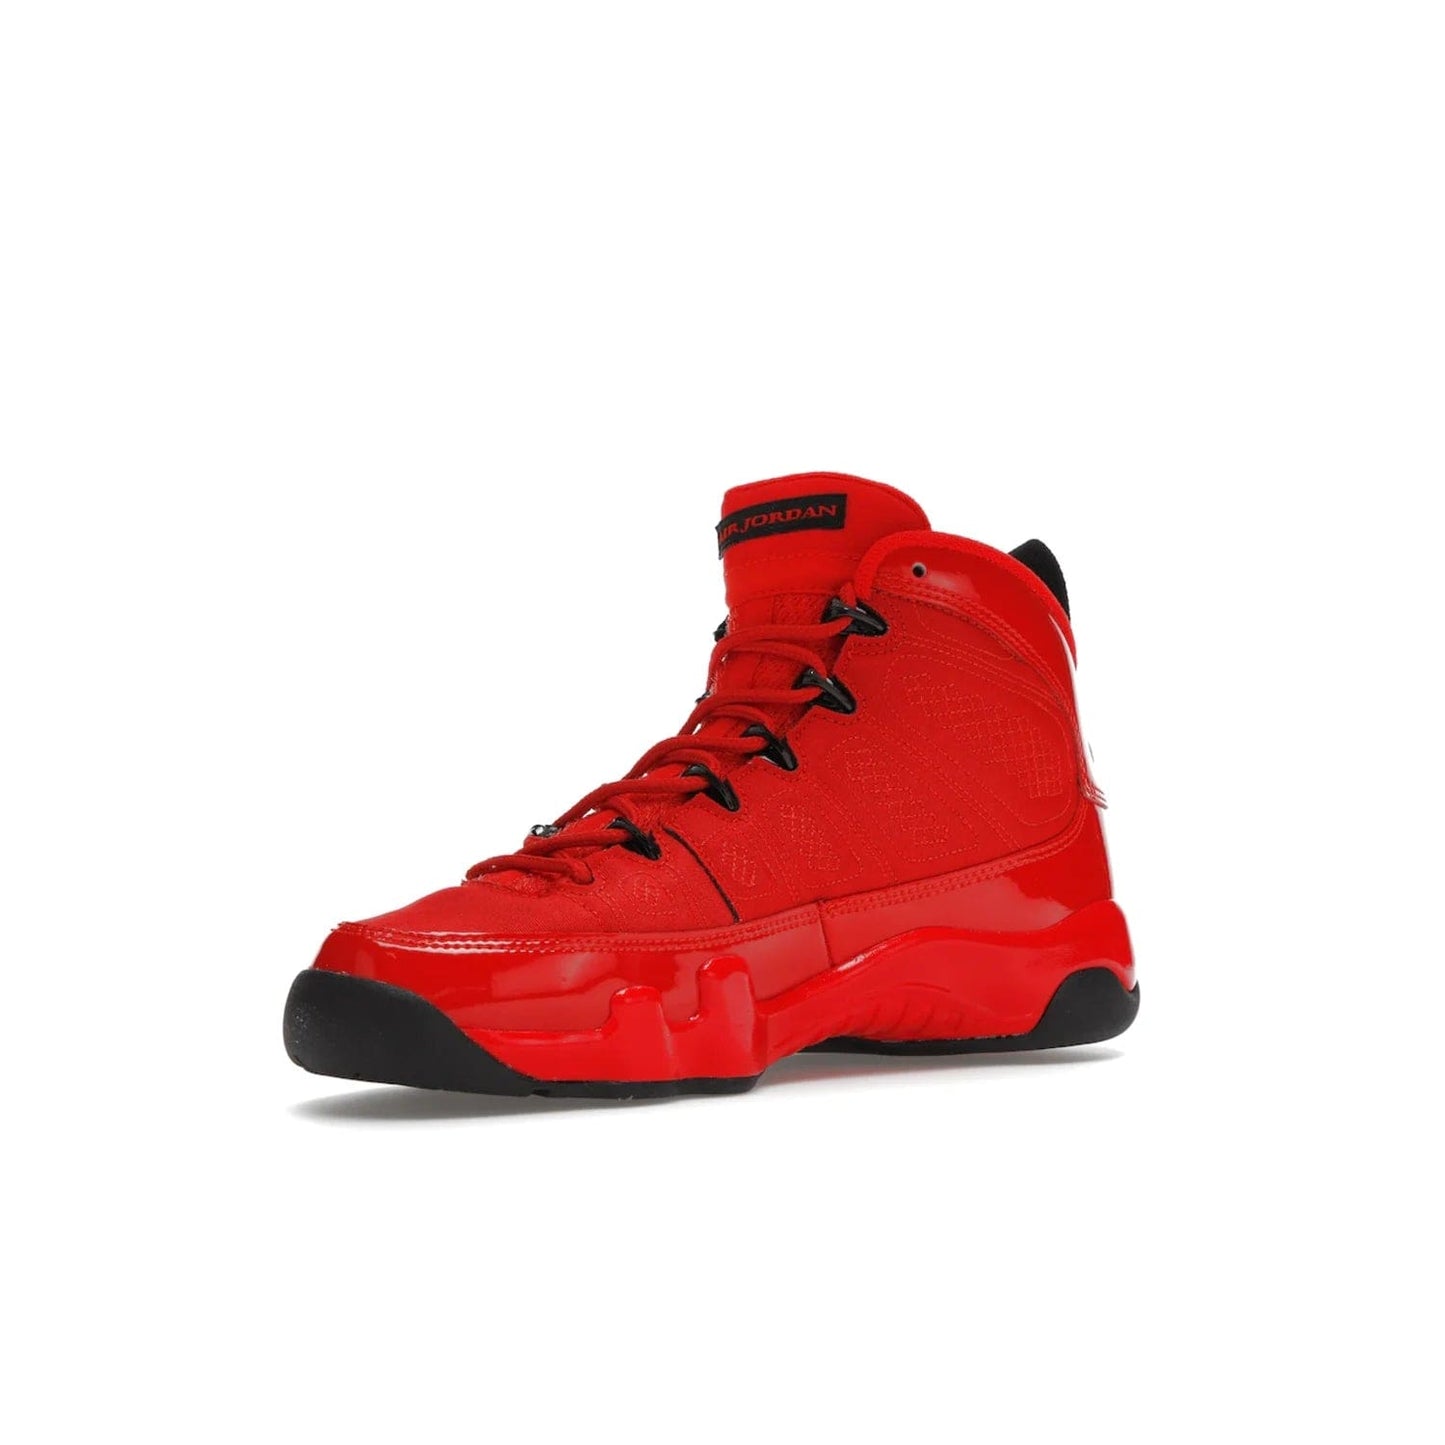 Jordan 9 Retro Chile Red (GS) - Image 15 - Only at www.BallersClubKickz.com - Introducing the Air Jordan 9 Retro Chile Red (GS), a vintage 1993 silhouette with fiery colorway. Features quilted side paneling, glossy patent leather, pull tabs, black contrast accents, and foam midsole. Launching May 2022 for $140.